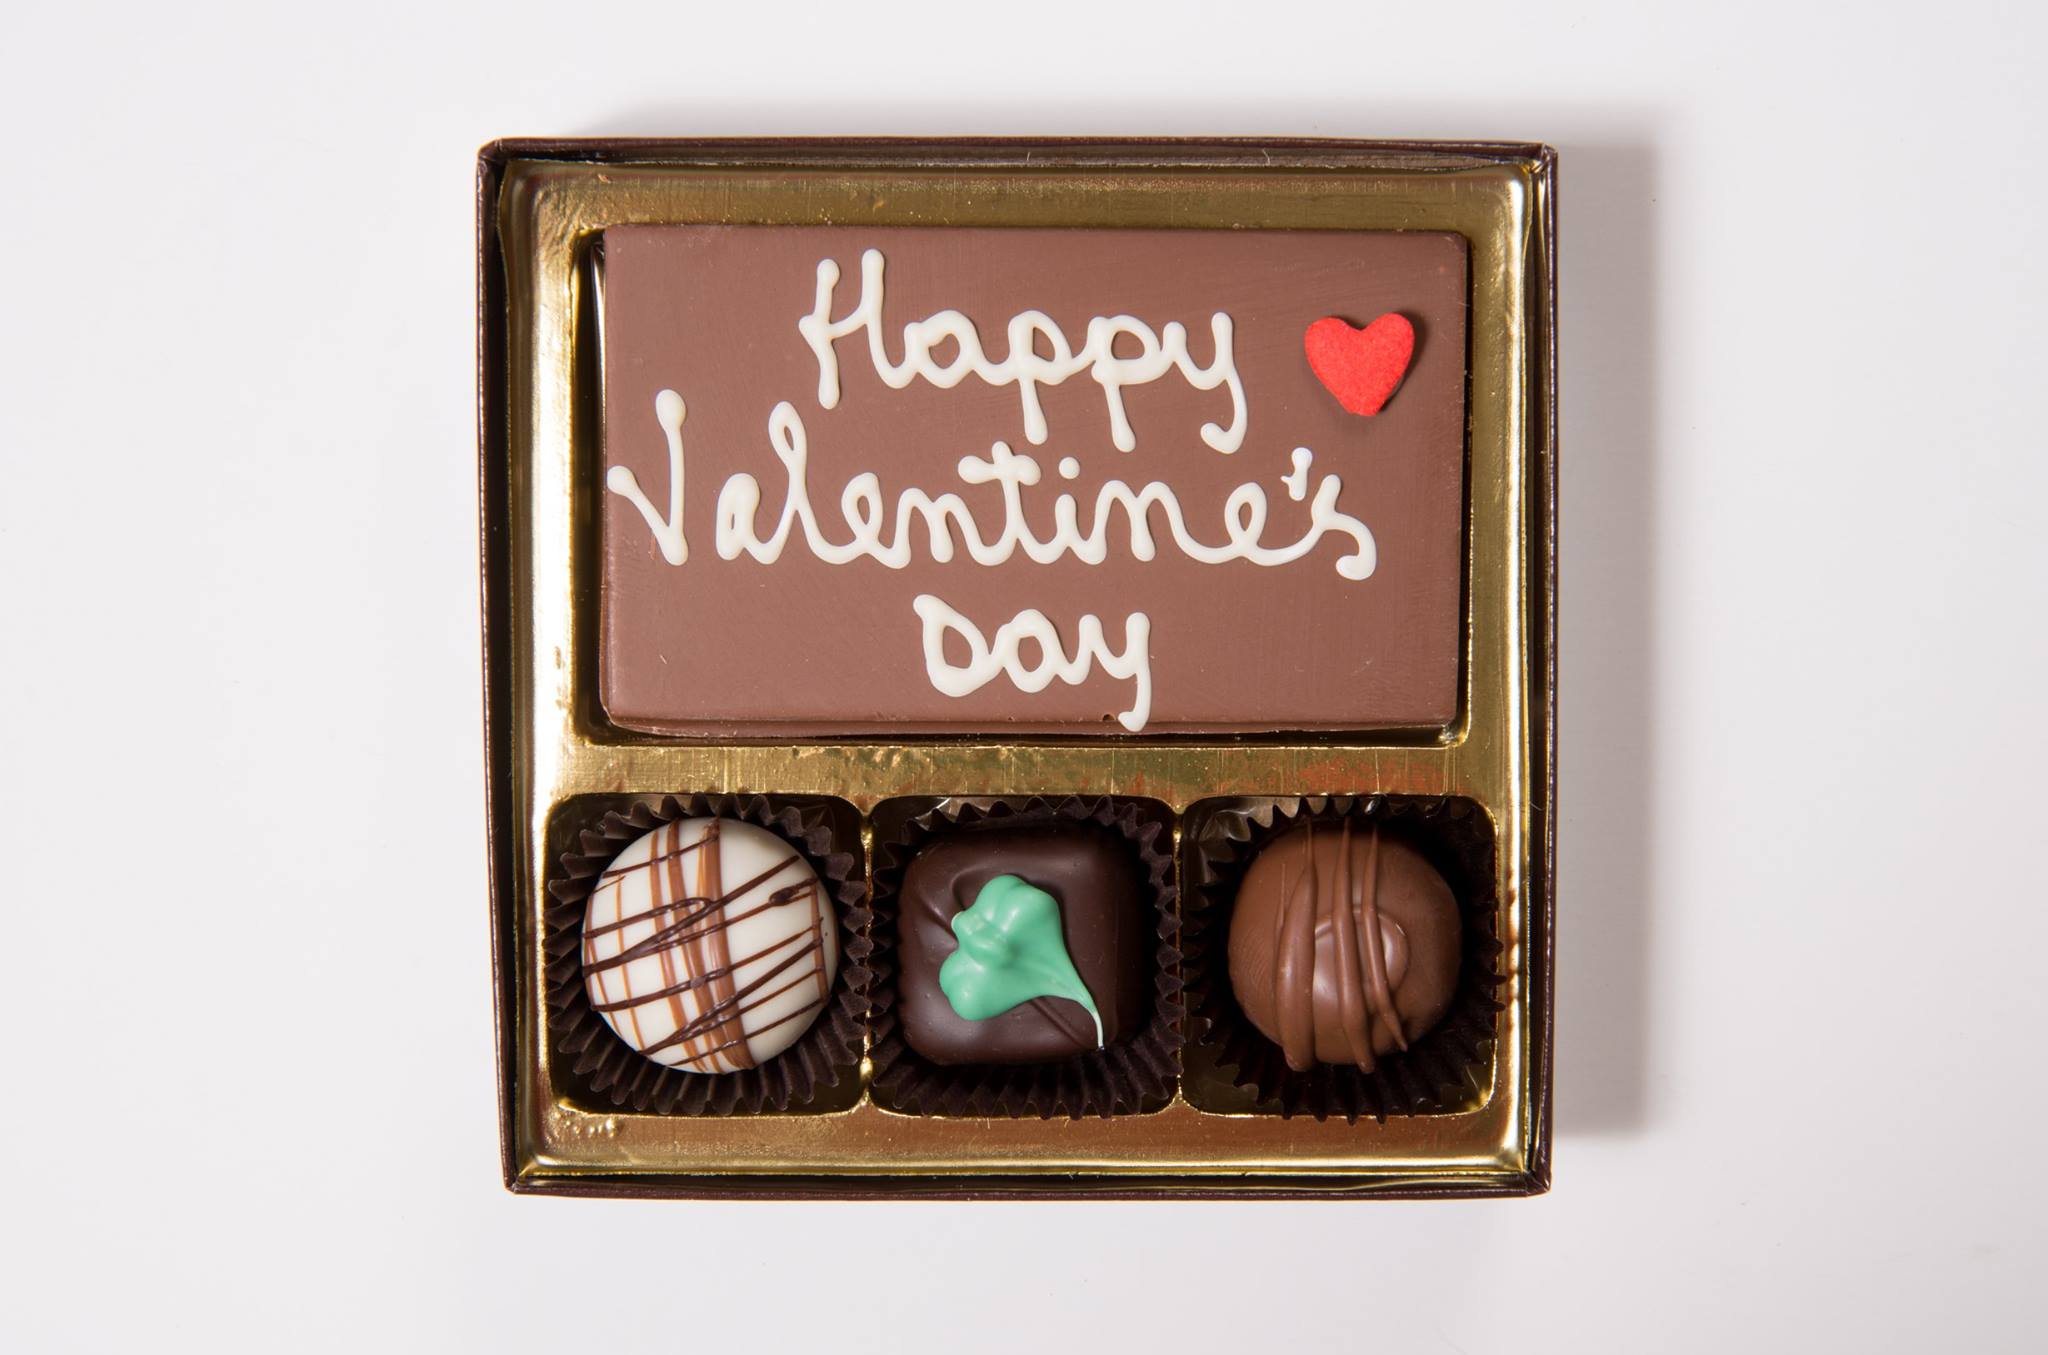 Valentine's Day chocolates: Save on treats from Lindt, Hershey's and more